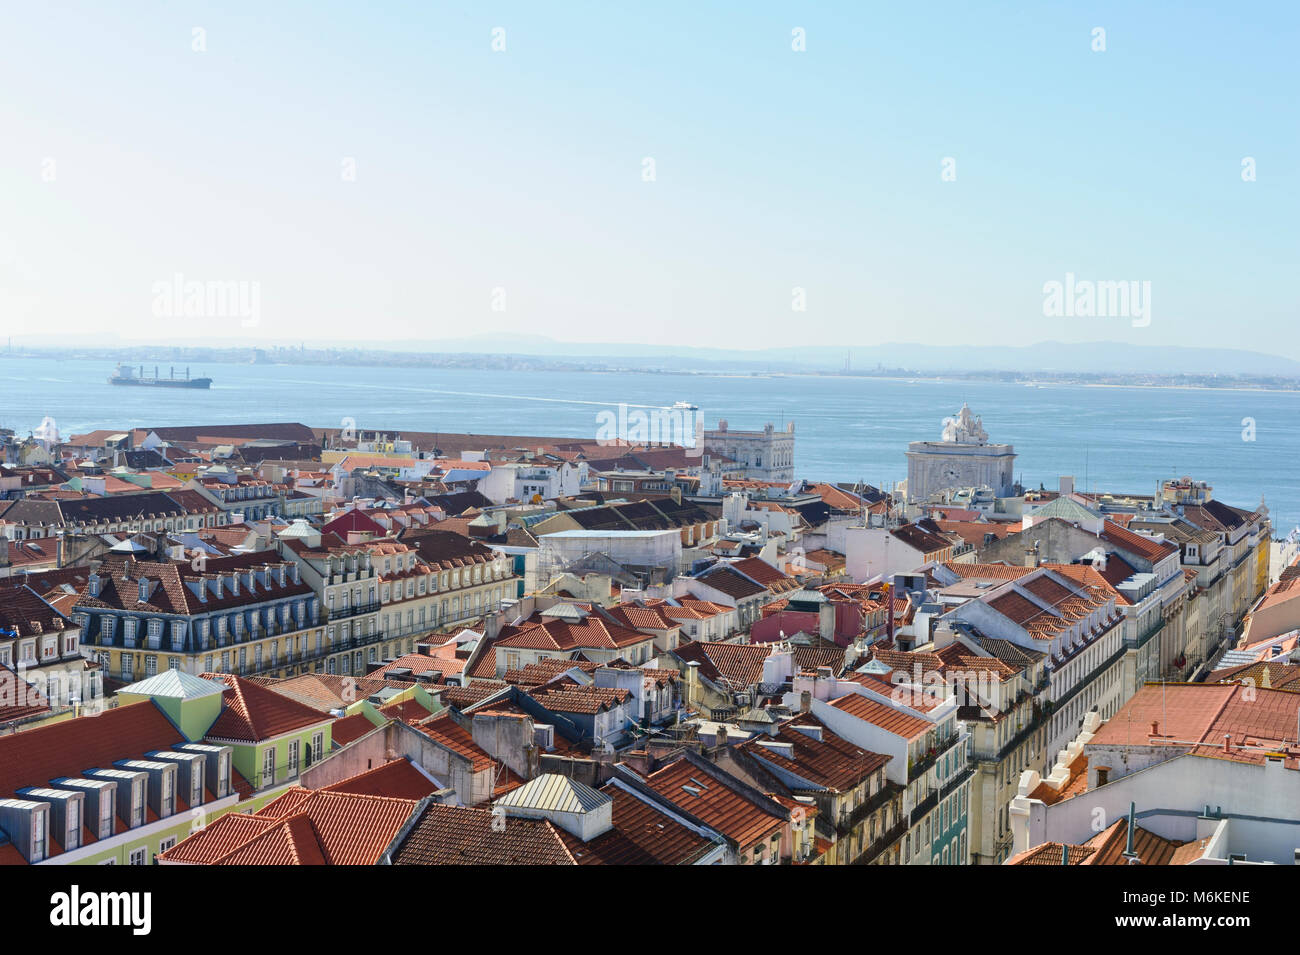 A scenic view of the City of Lisbon, Portugal Stock Photo